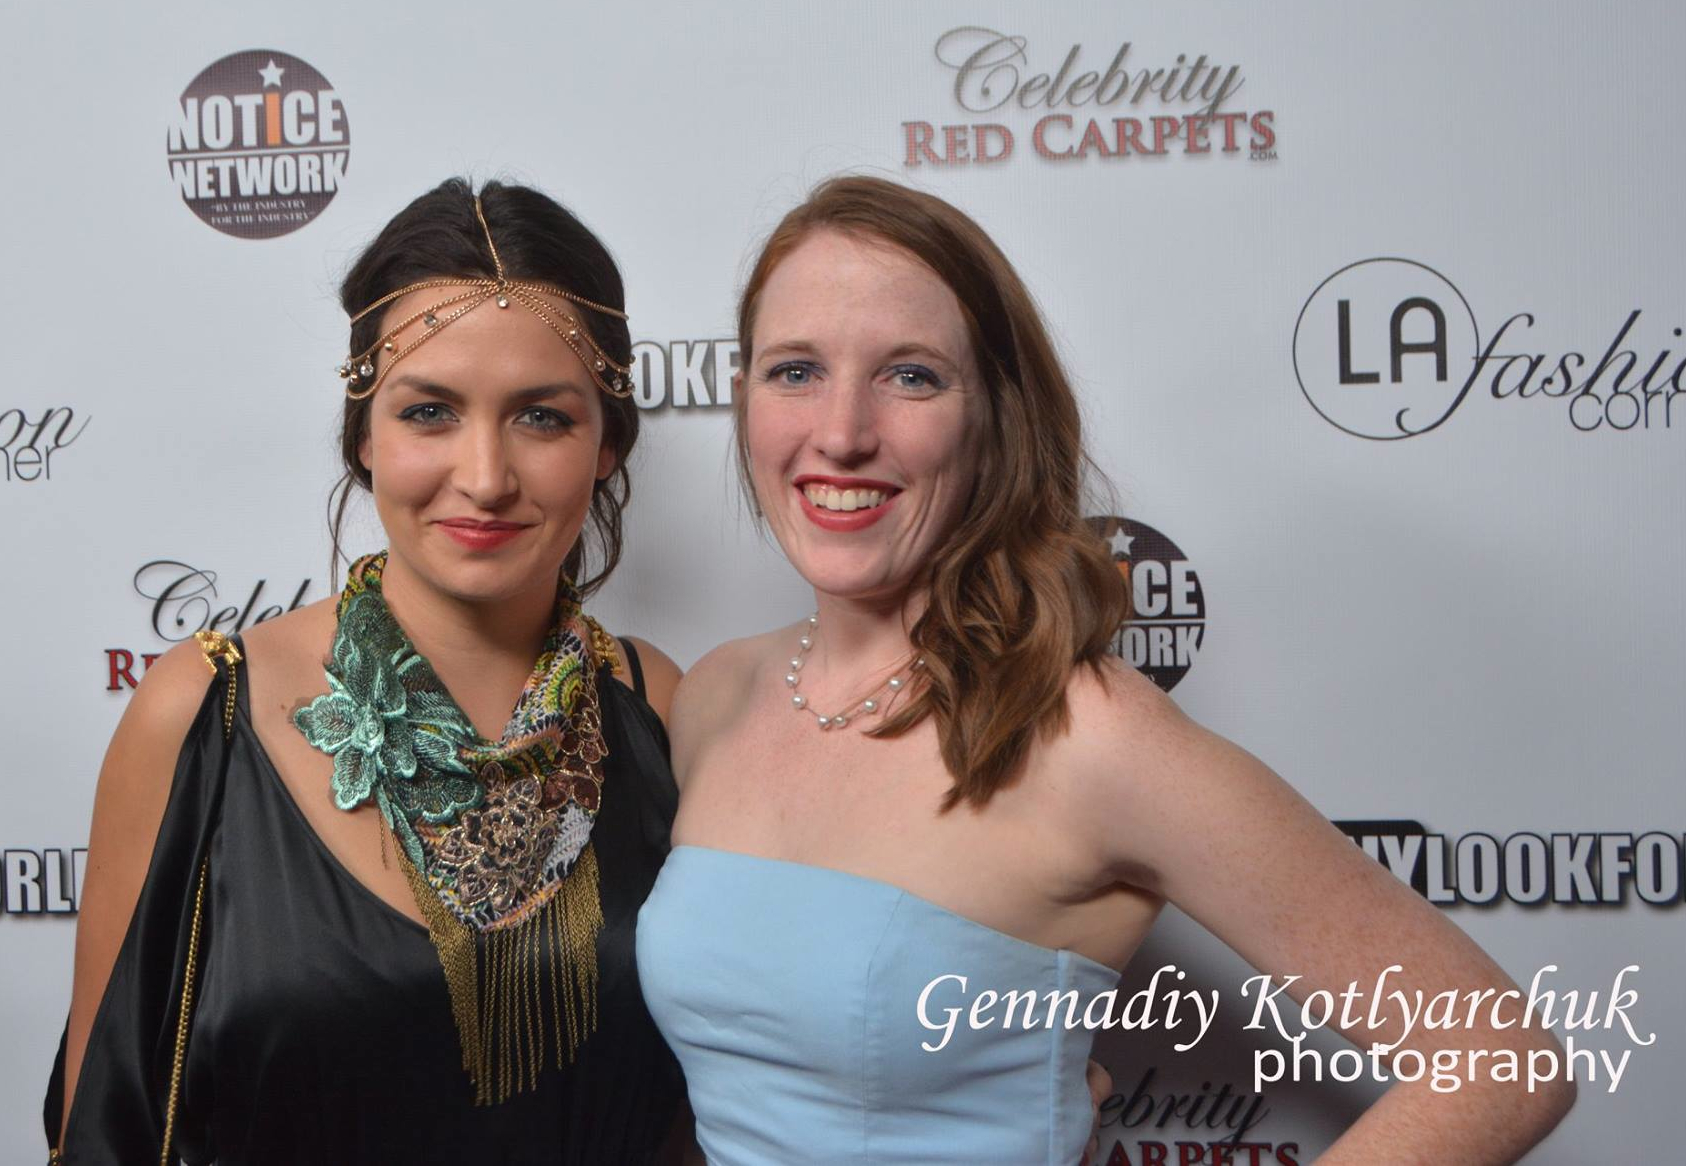 Deborah Dominguez and Heather Boothby at Event for American Music Awards, 2014